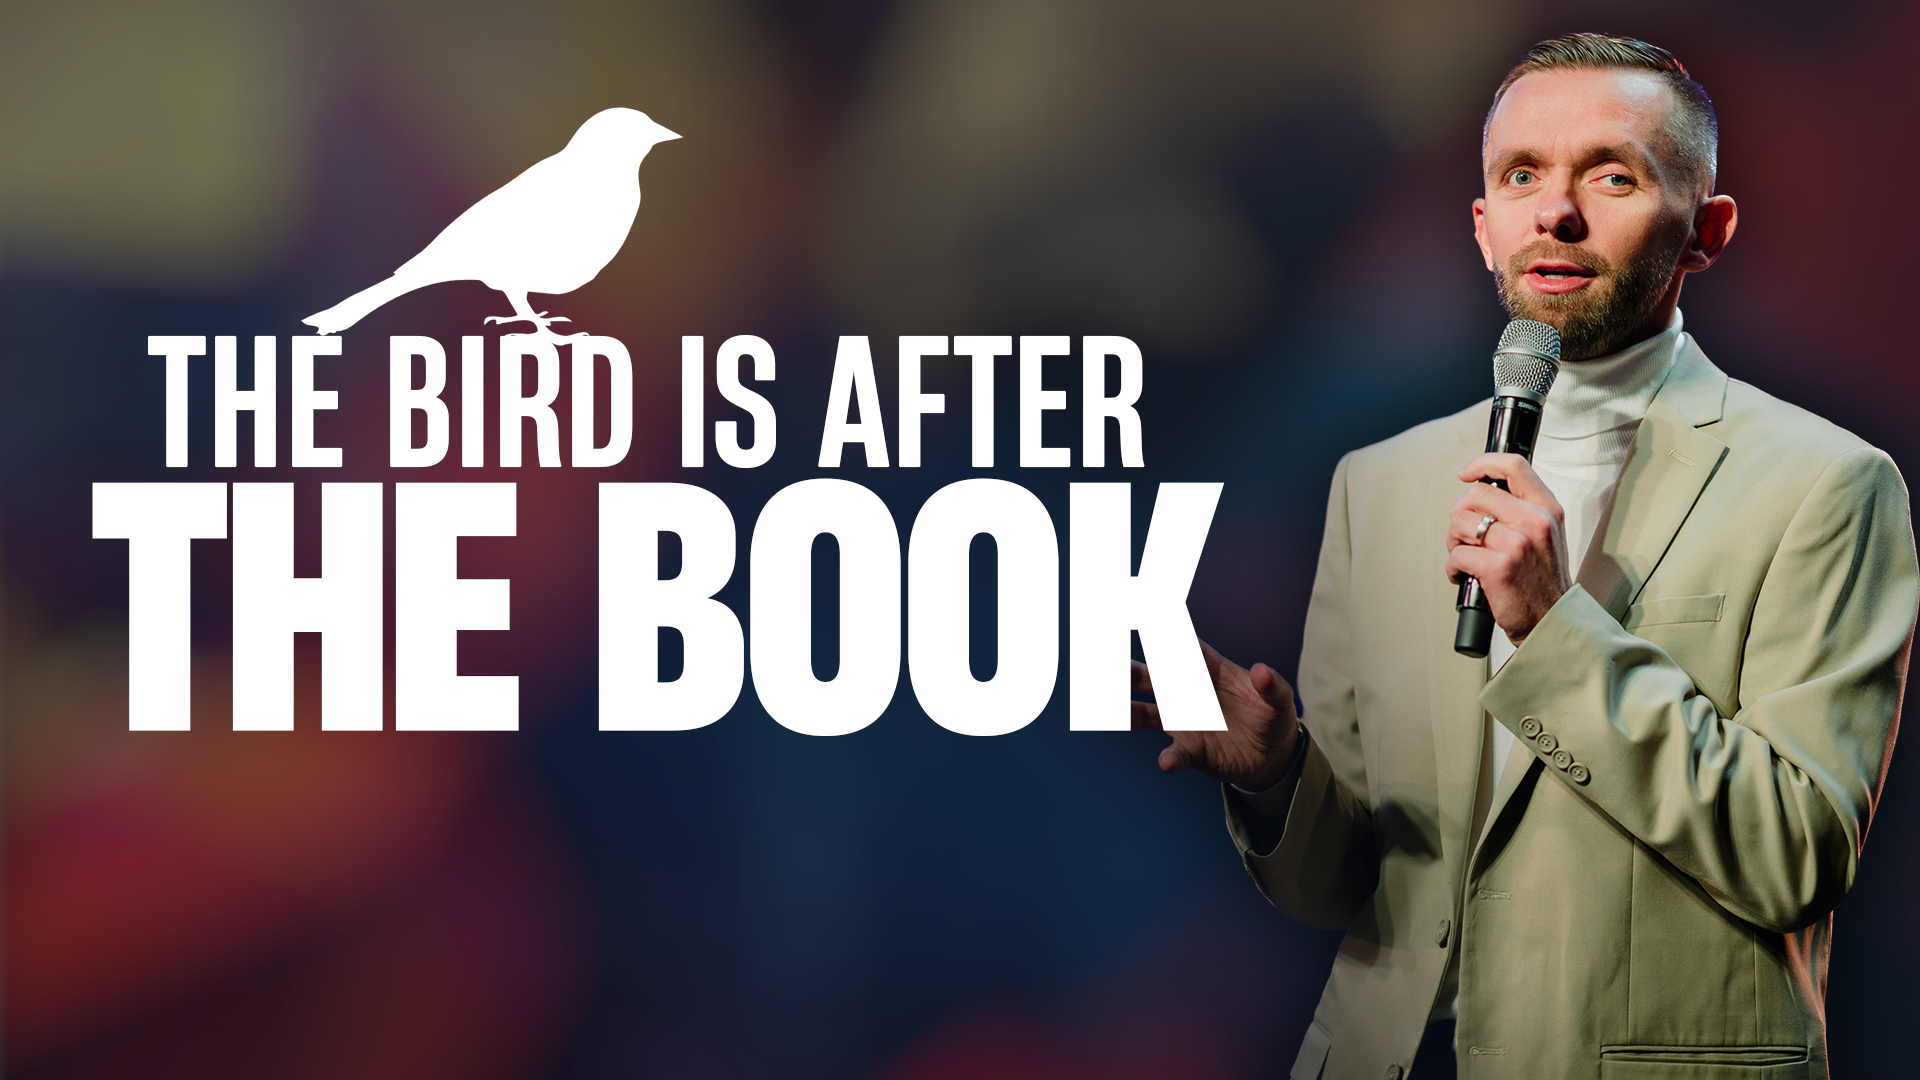 Featured Image for “The Bird is After The Book”